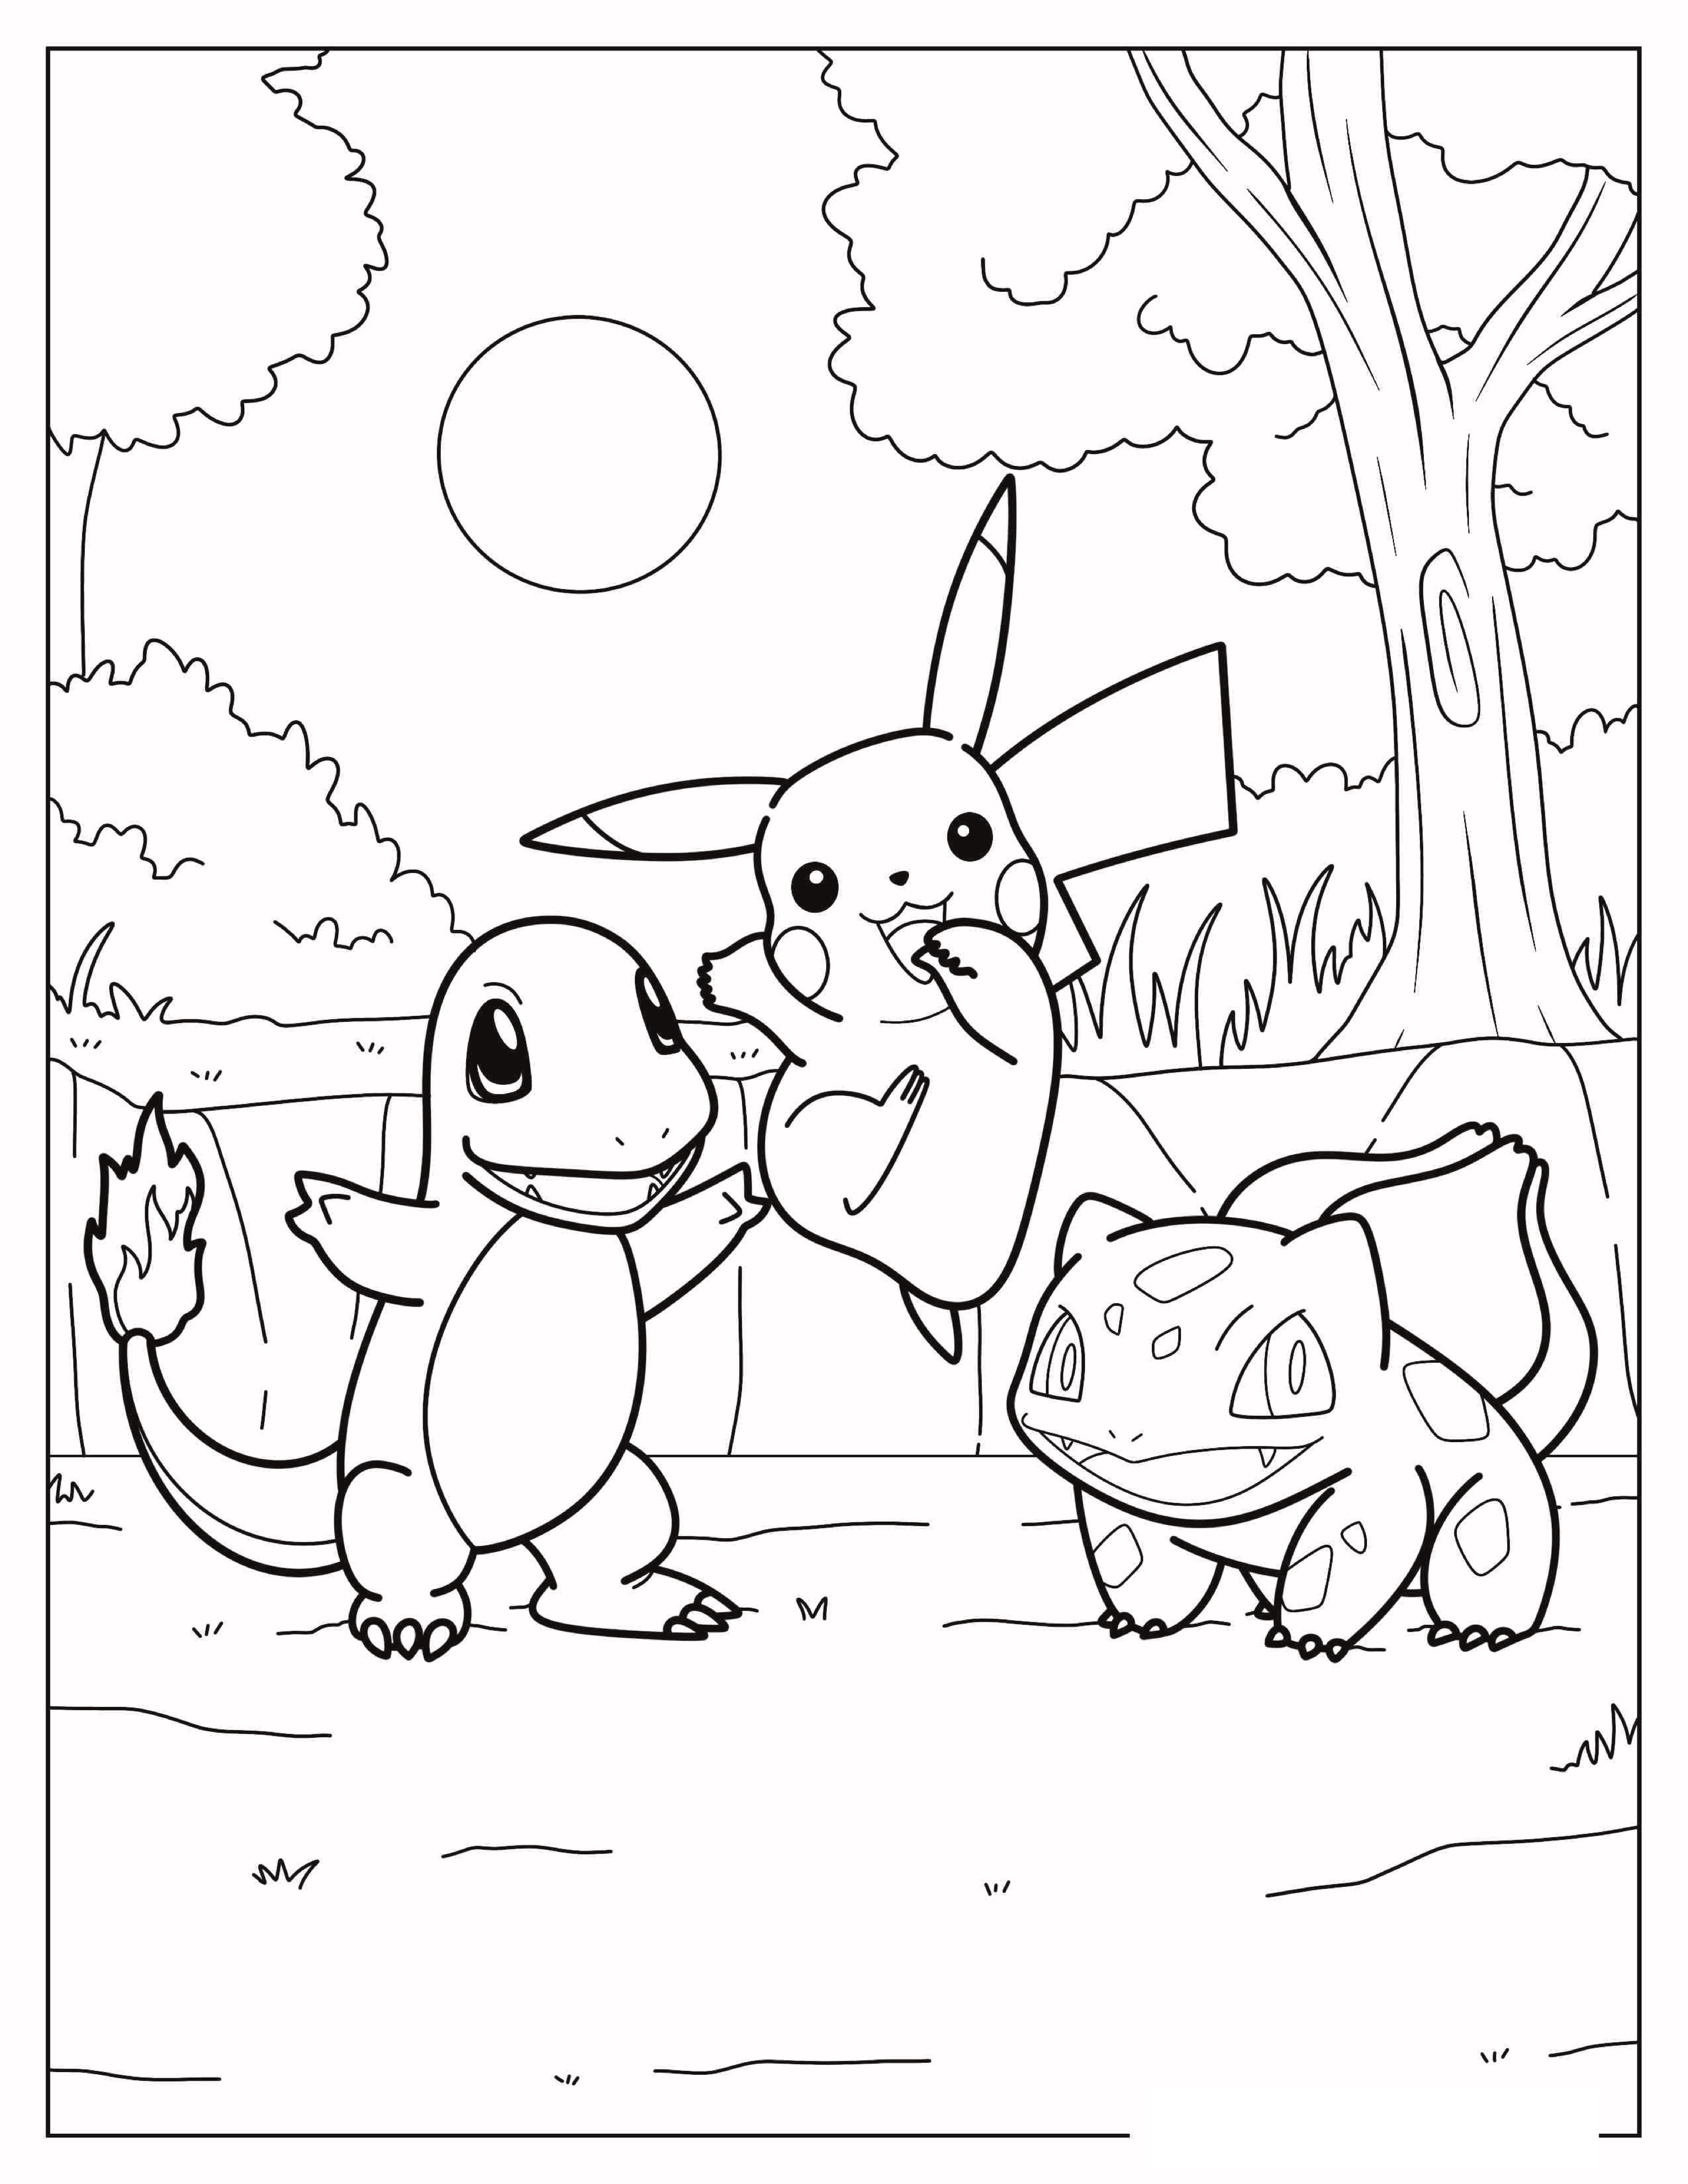 Iconic-Pokemon-Coloring-Page-For-Kids.jpg